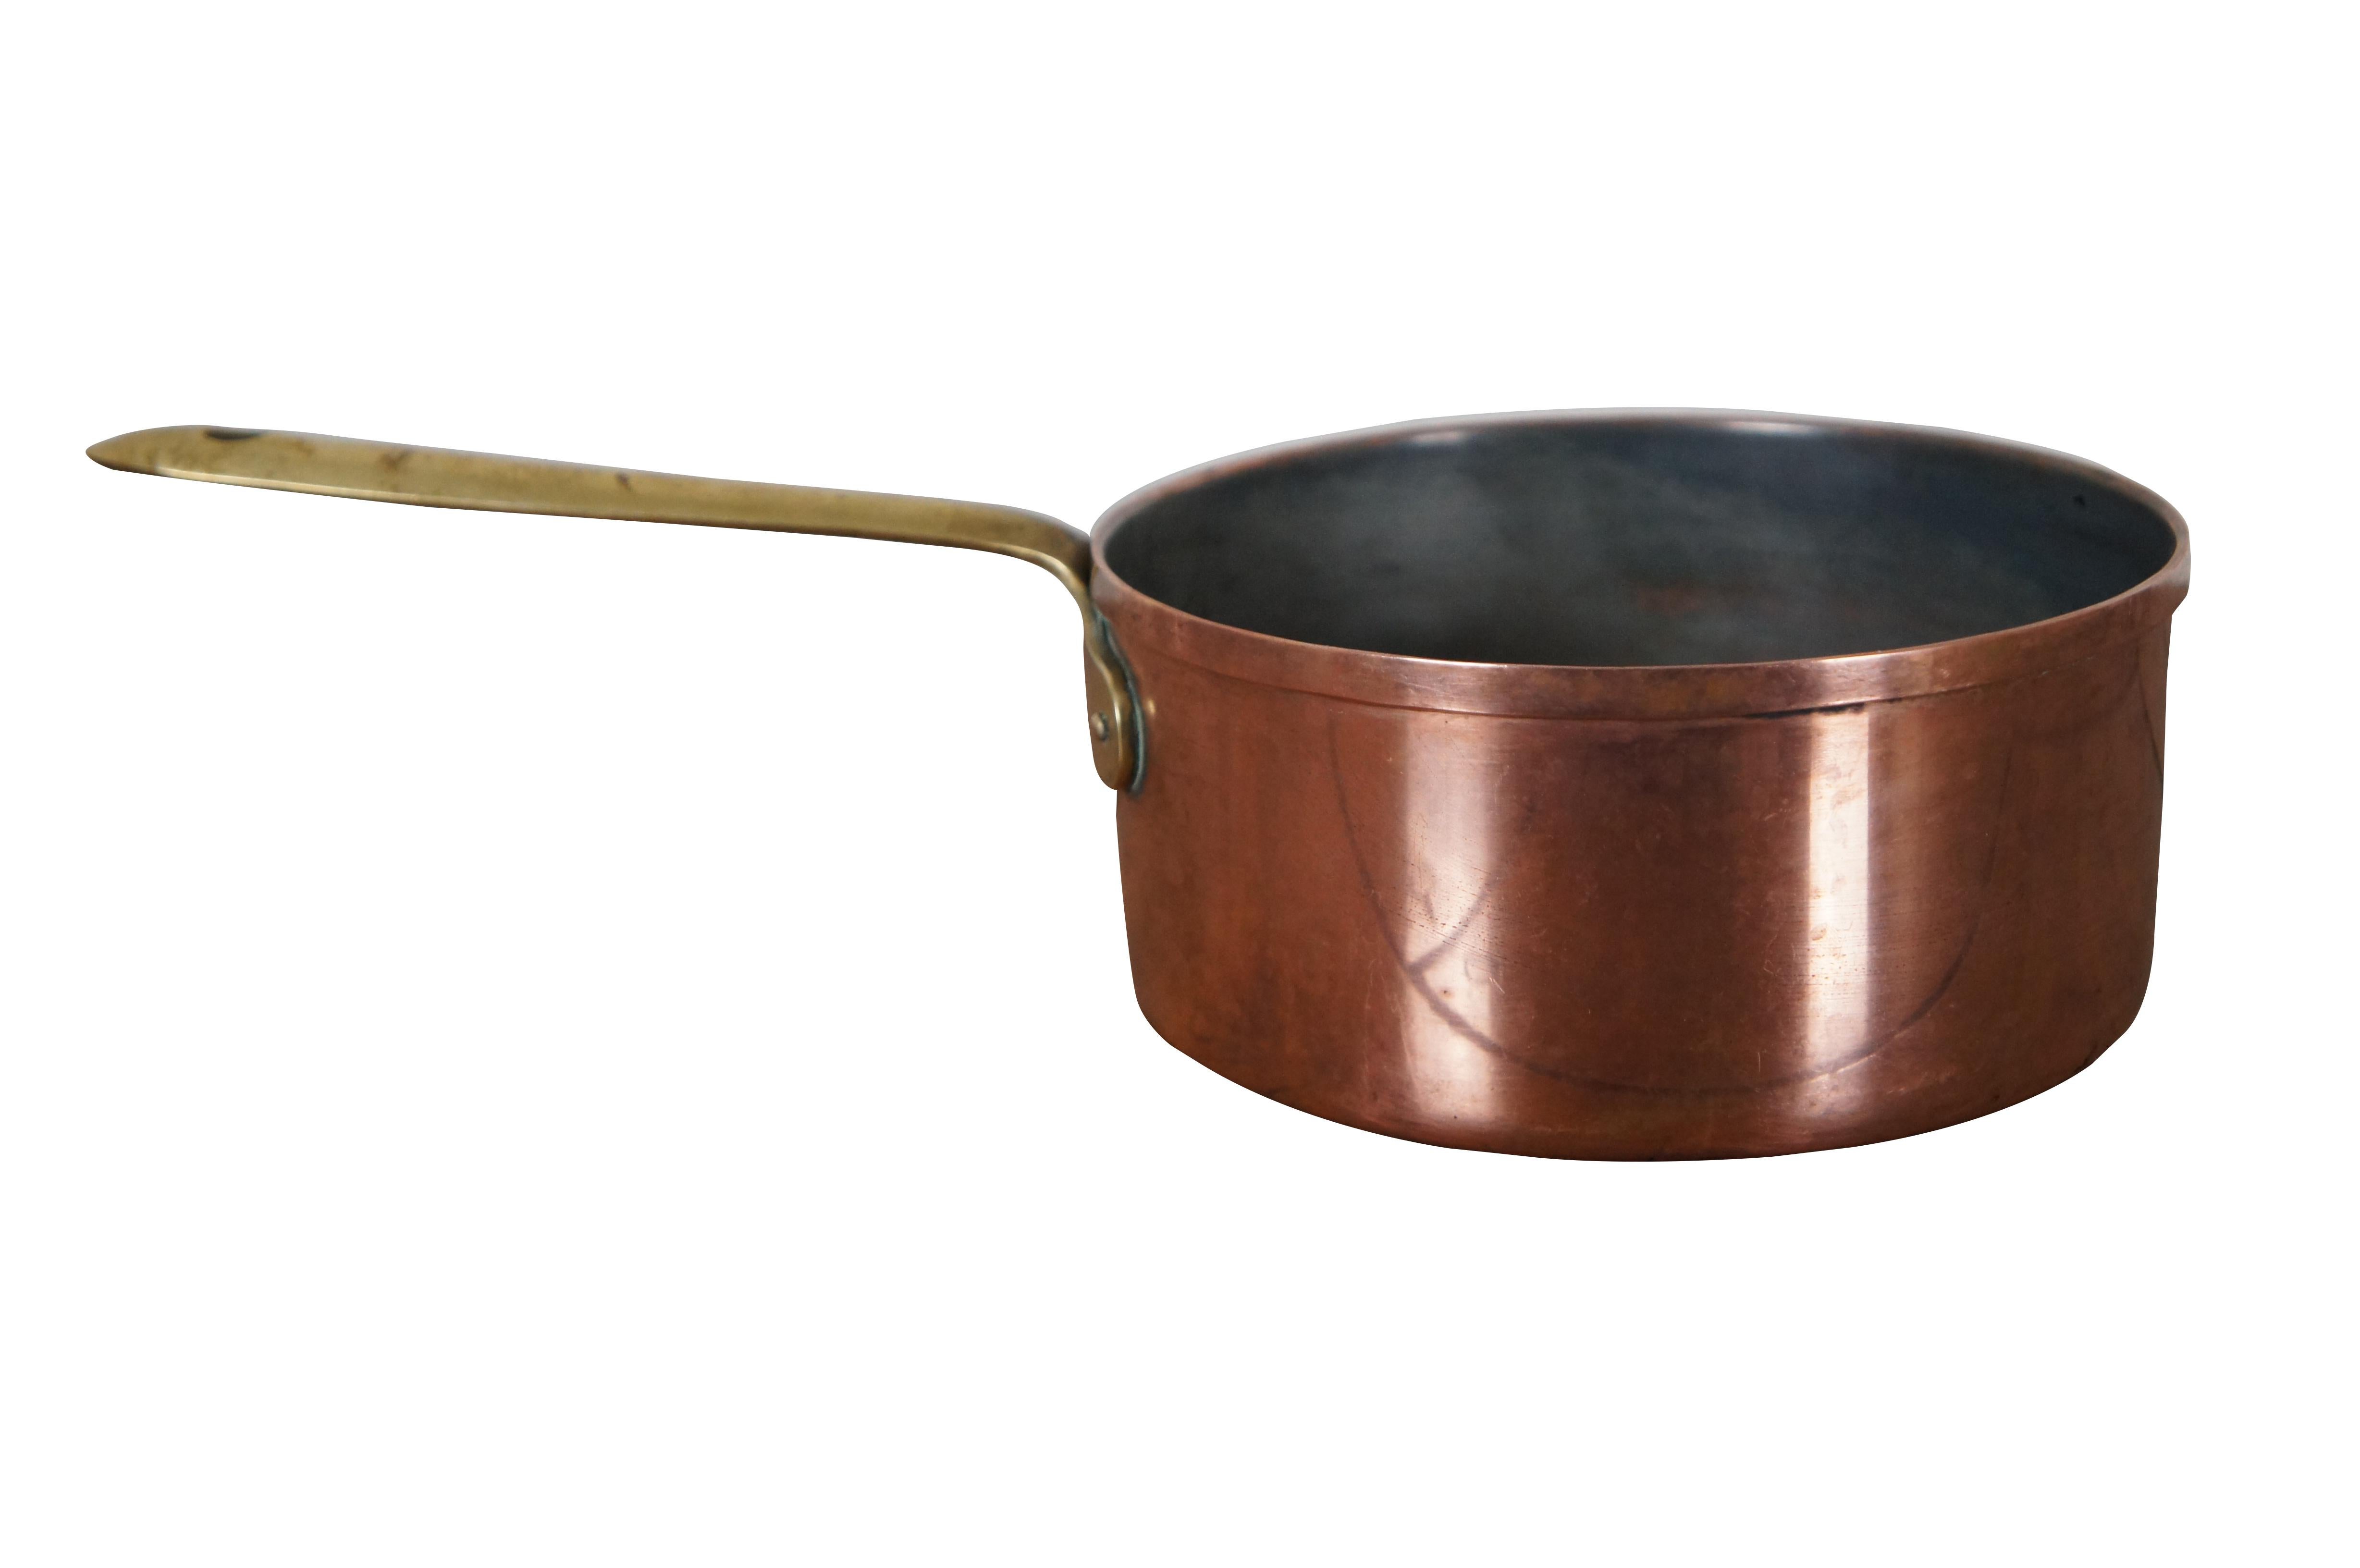 Vintage Portugese copper sauce pot with brass handle.  Made in Portugal.

Dimensions:
13.5” x 6.75” x 3.5” (Width x Depth x Height)